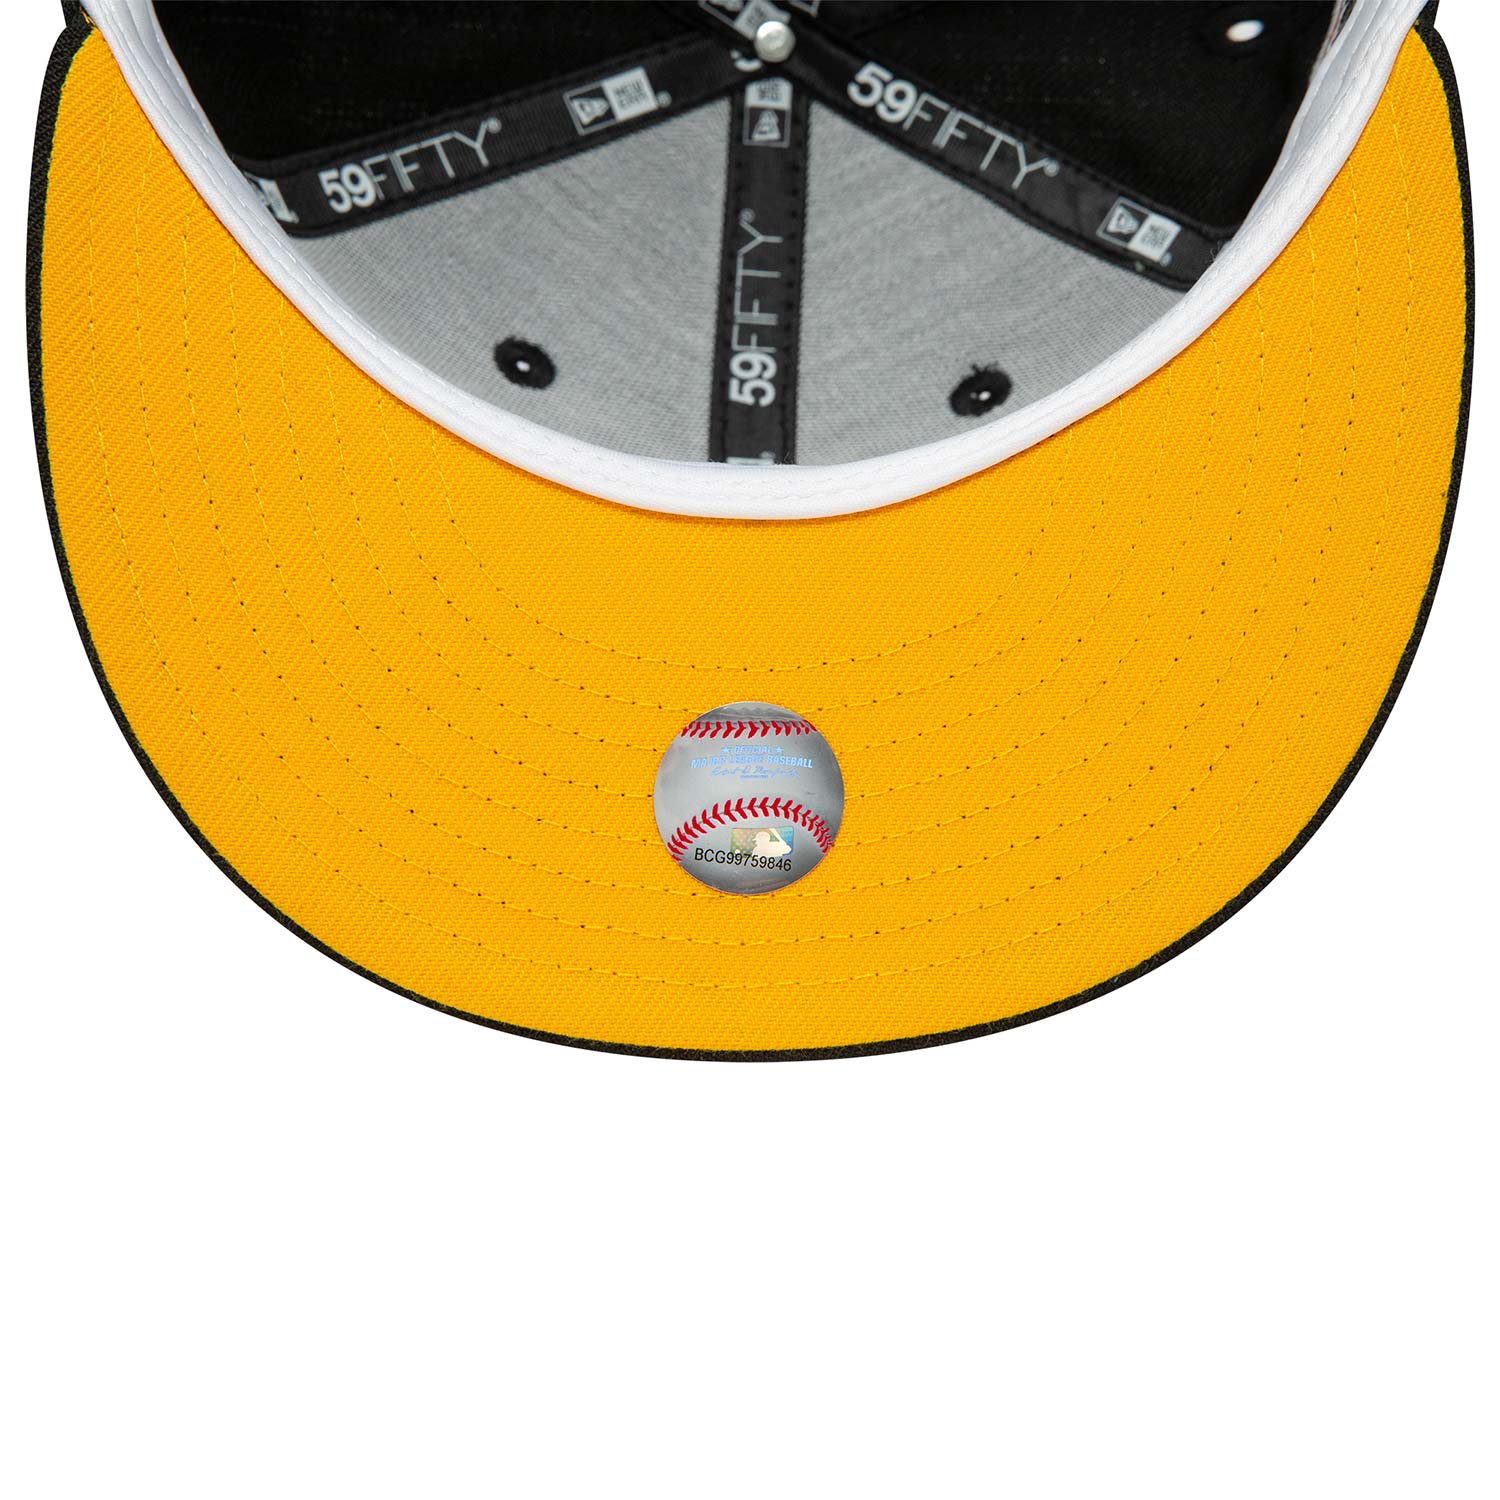 Pittsburgh Pirates Black And Yellow 59FIFTY Fitted Cap